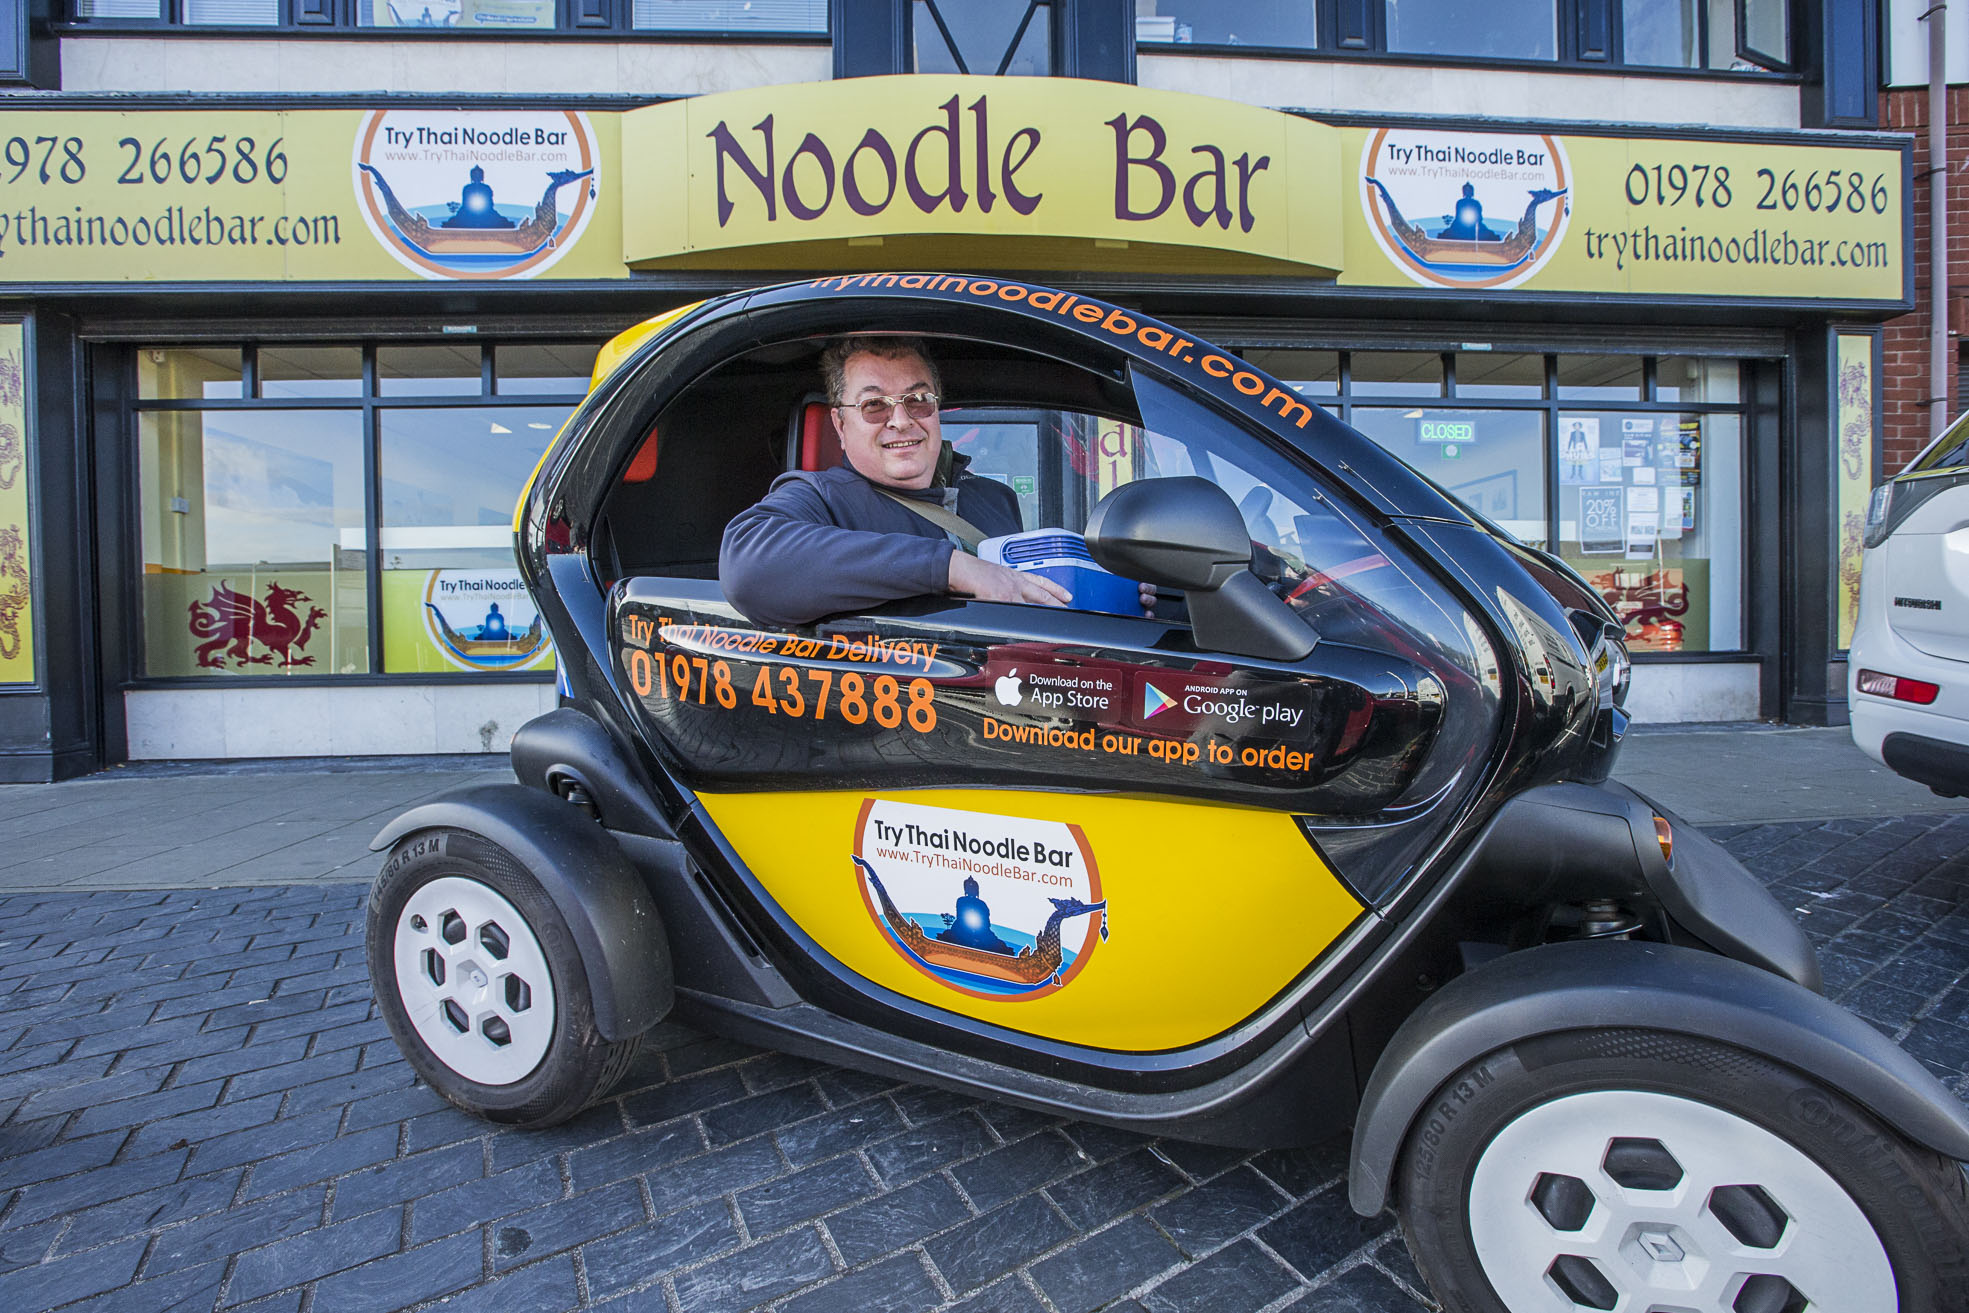 Noodle Bar boss Gwyn causes real stir with film starring new delivery vehicle